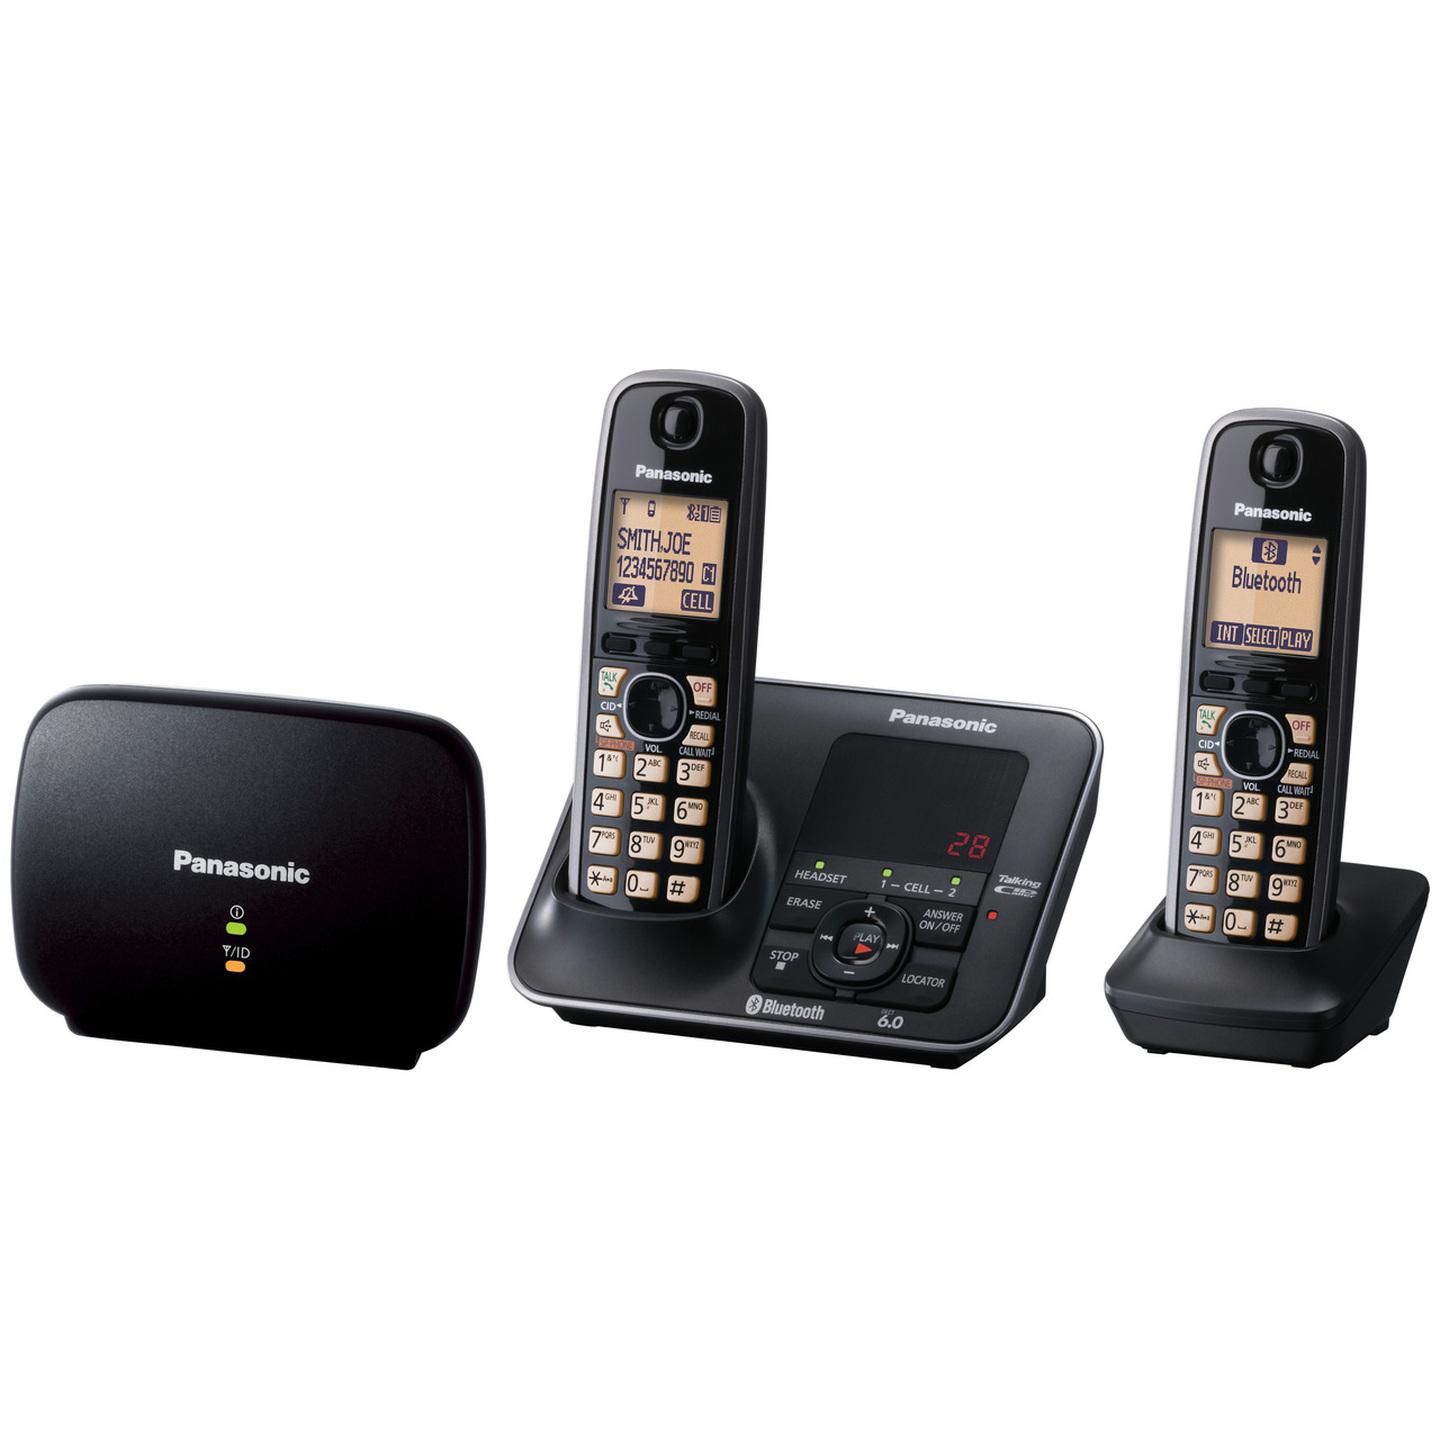 Panasonic Twin Handset Cordless Telephone with Mobile Link & Repeater